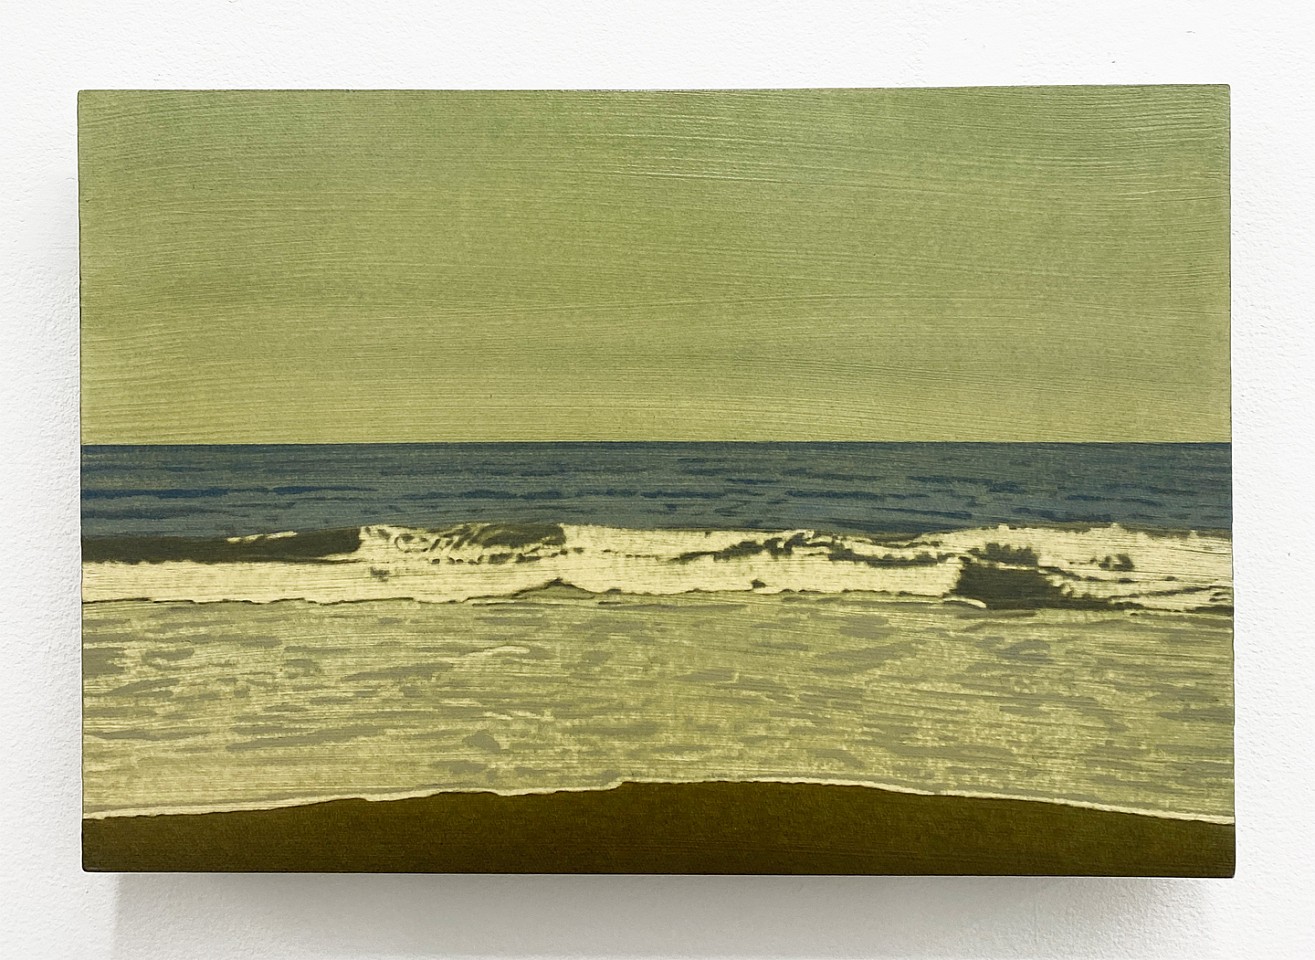 Clay Wagstaff
Ocean no. 45, 2012
WAG281
oil on panel, 13 x 19 inches